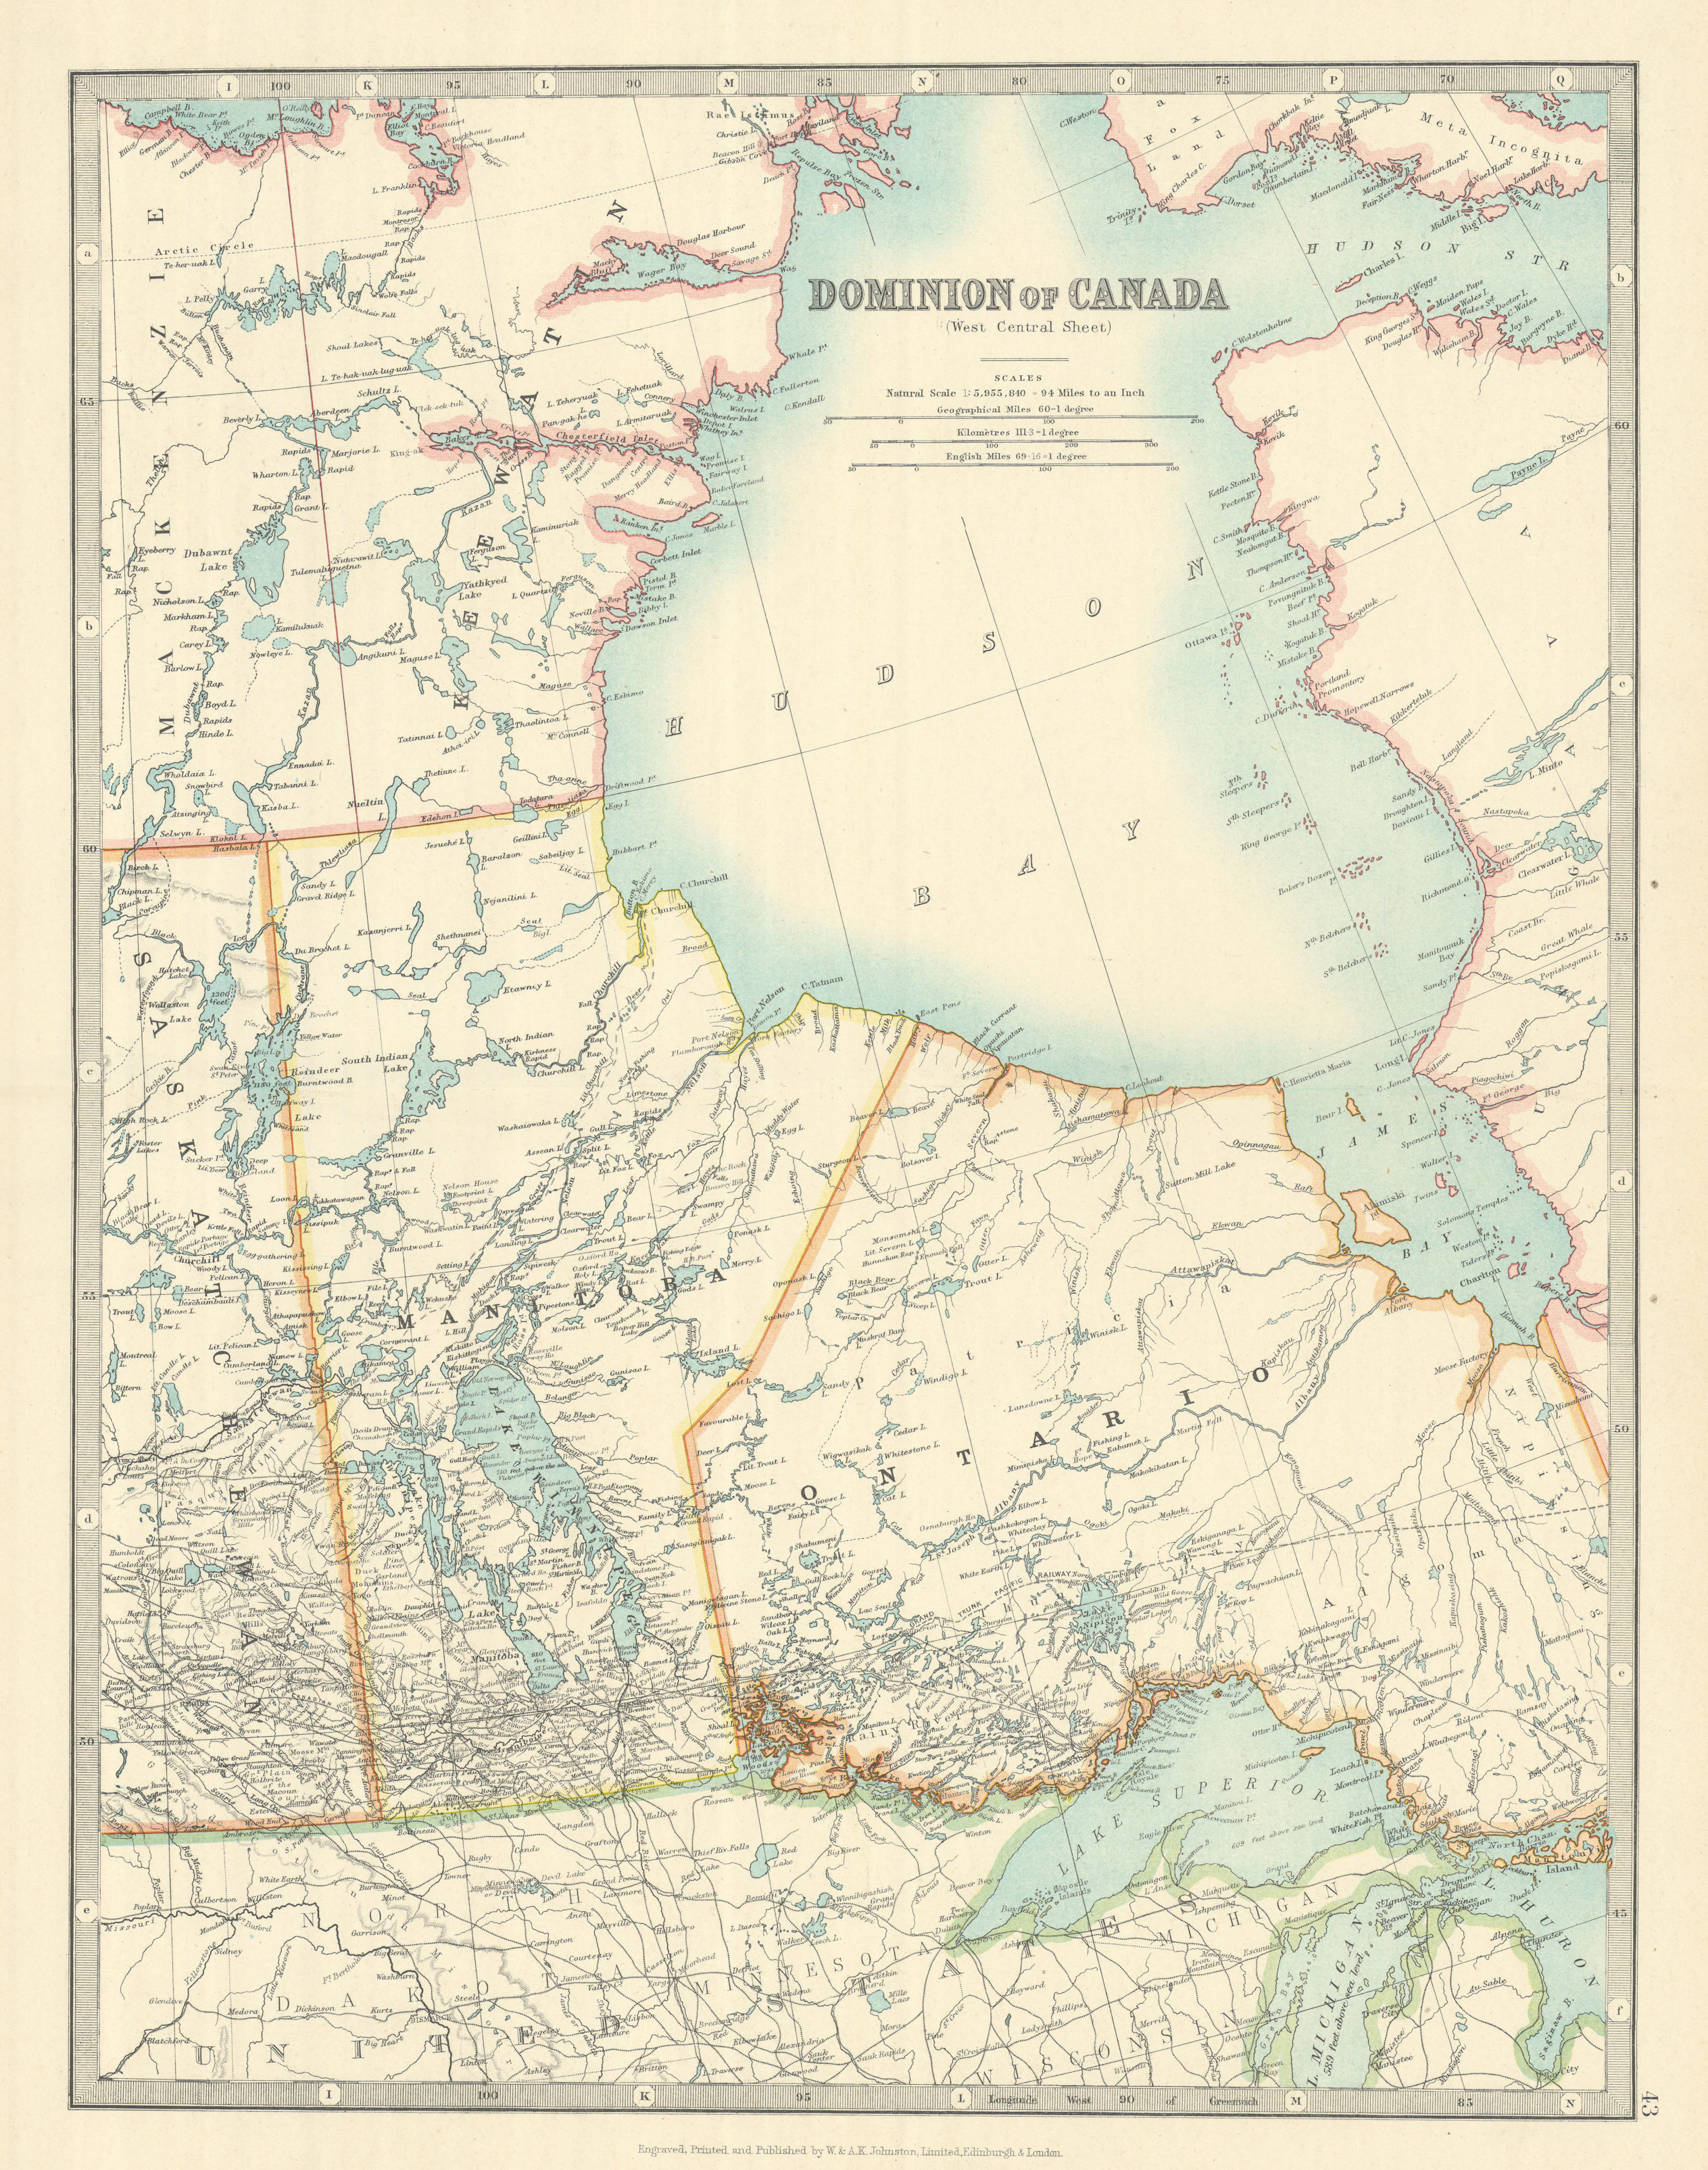 Associate Product HUDSON BAY & CENTRAL CANADA. Manitoba. Northern Ontario. JOHNSTON 1913 old map